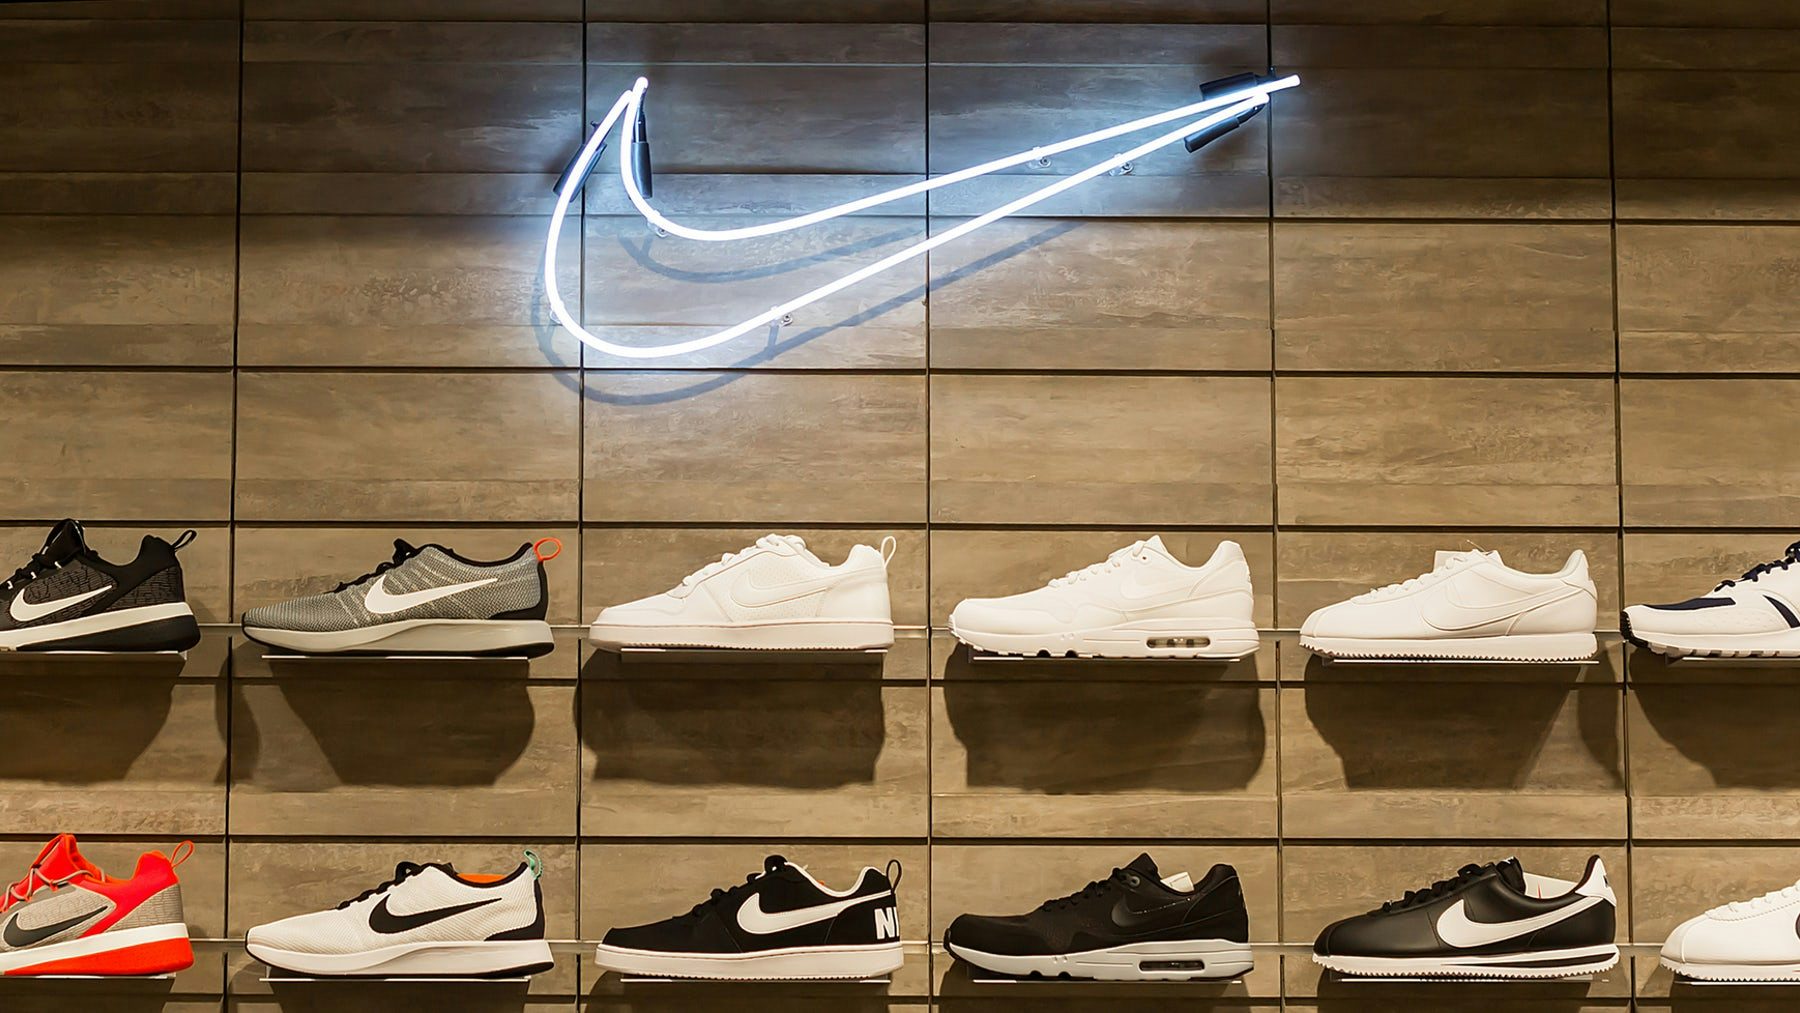 nike sales assistant